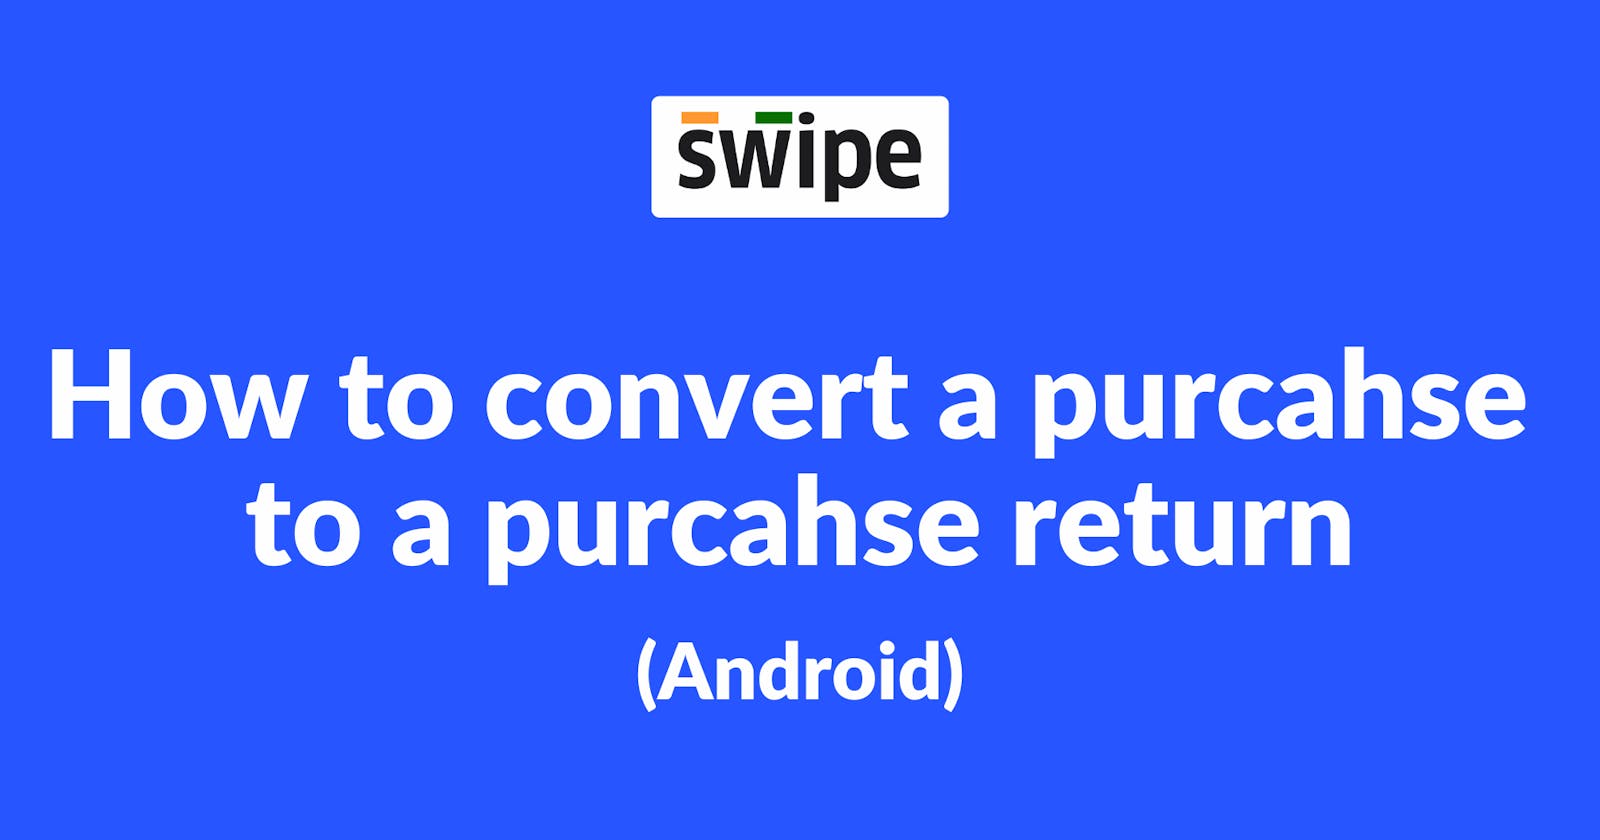 How to convert a purchase to a purchase return on Android